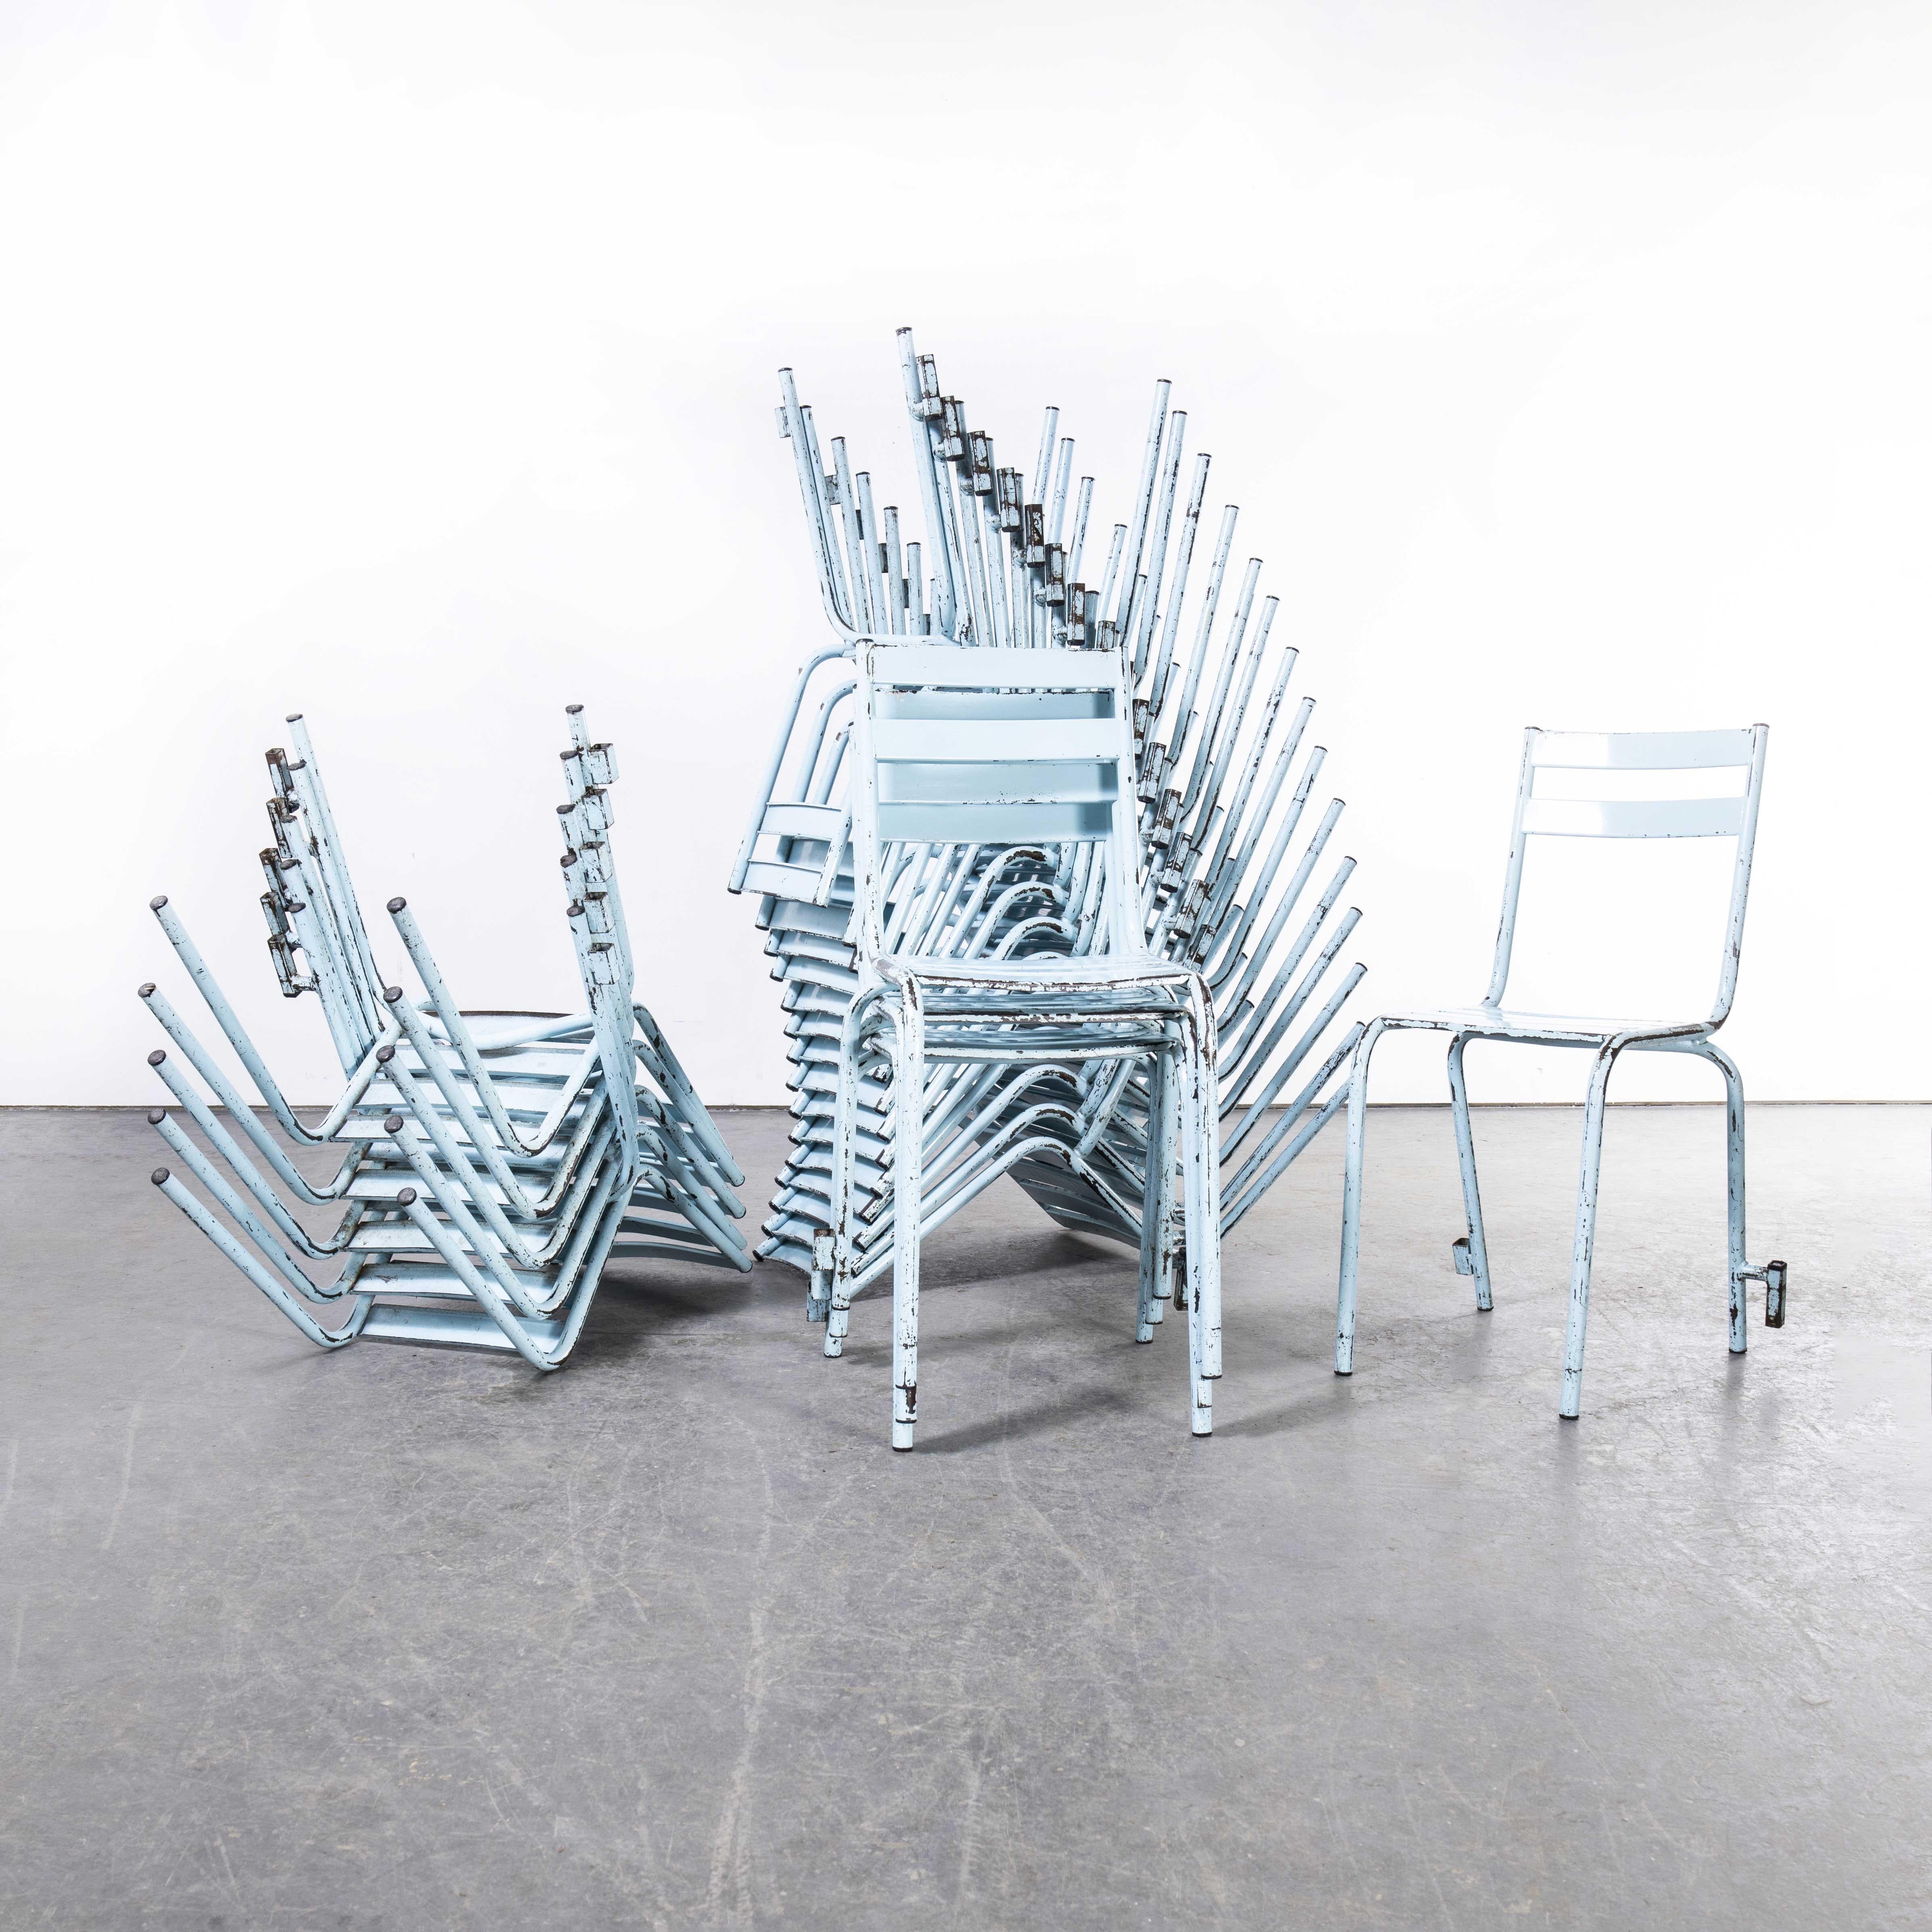 1950s French ArtProg sky blue metal stacking outdoor chairs – various quantities available
1950s French ArtProg sky blue metal stacking outdoor chairs -various quantities available. Reminiscent of Tolix but not made by Tolix, ArtProg was a producer